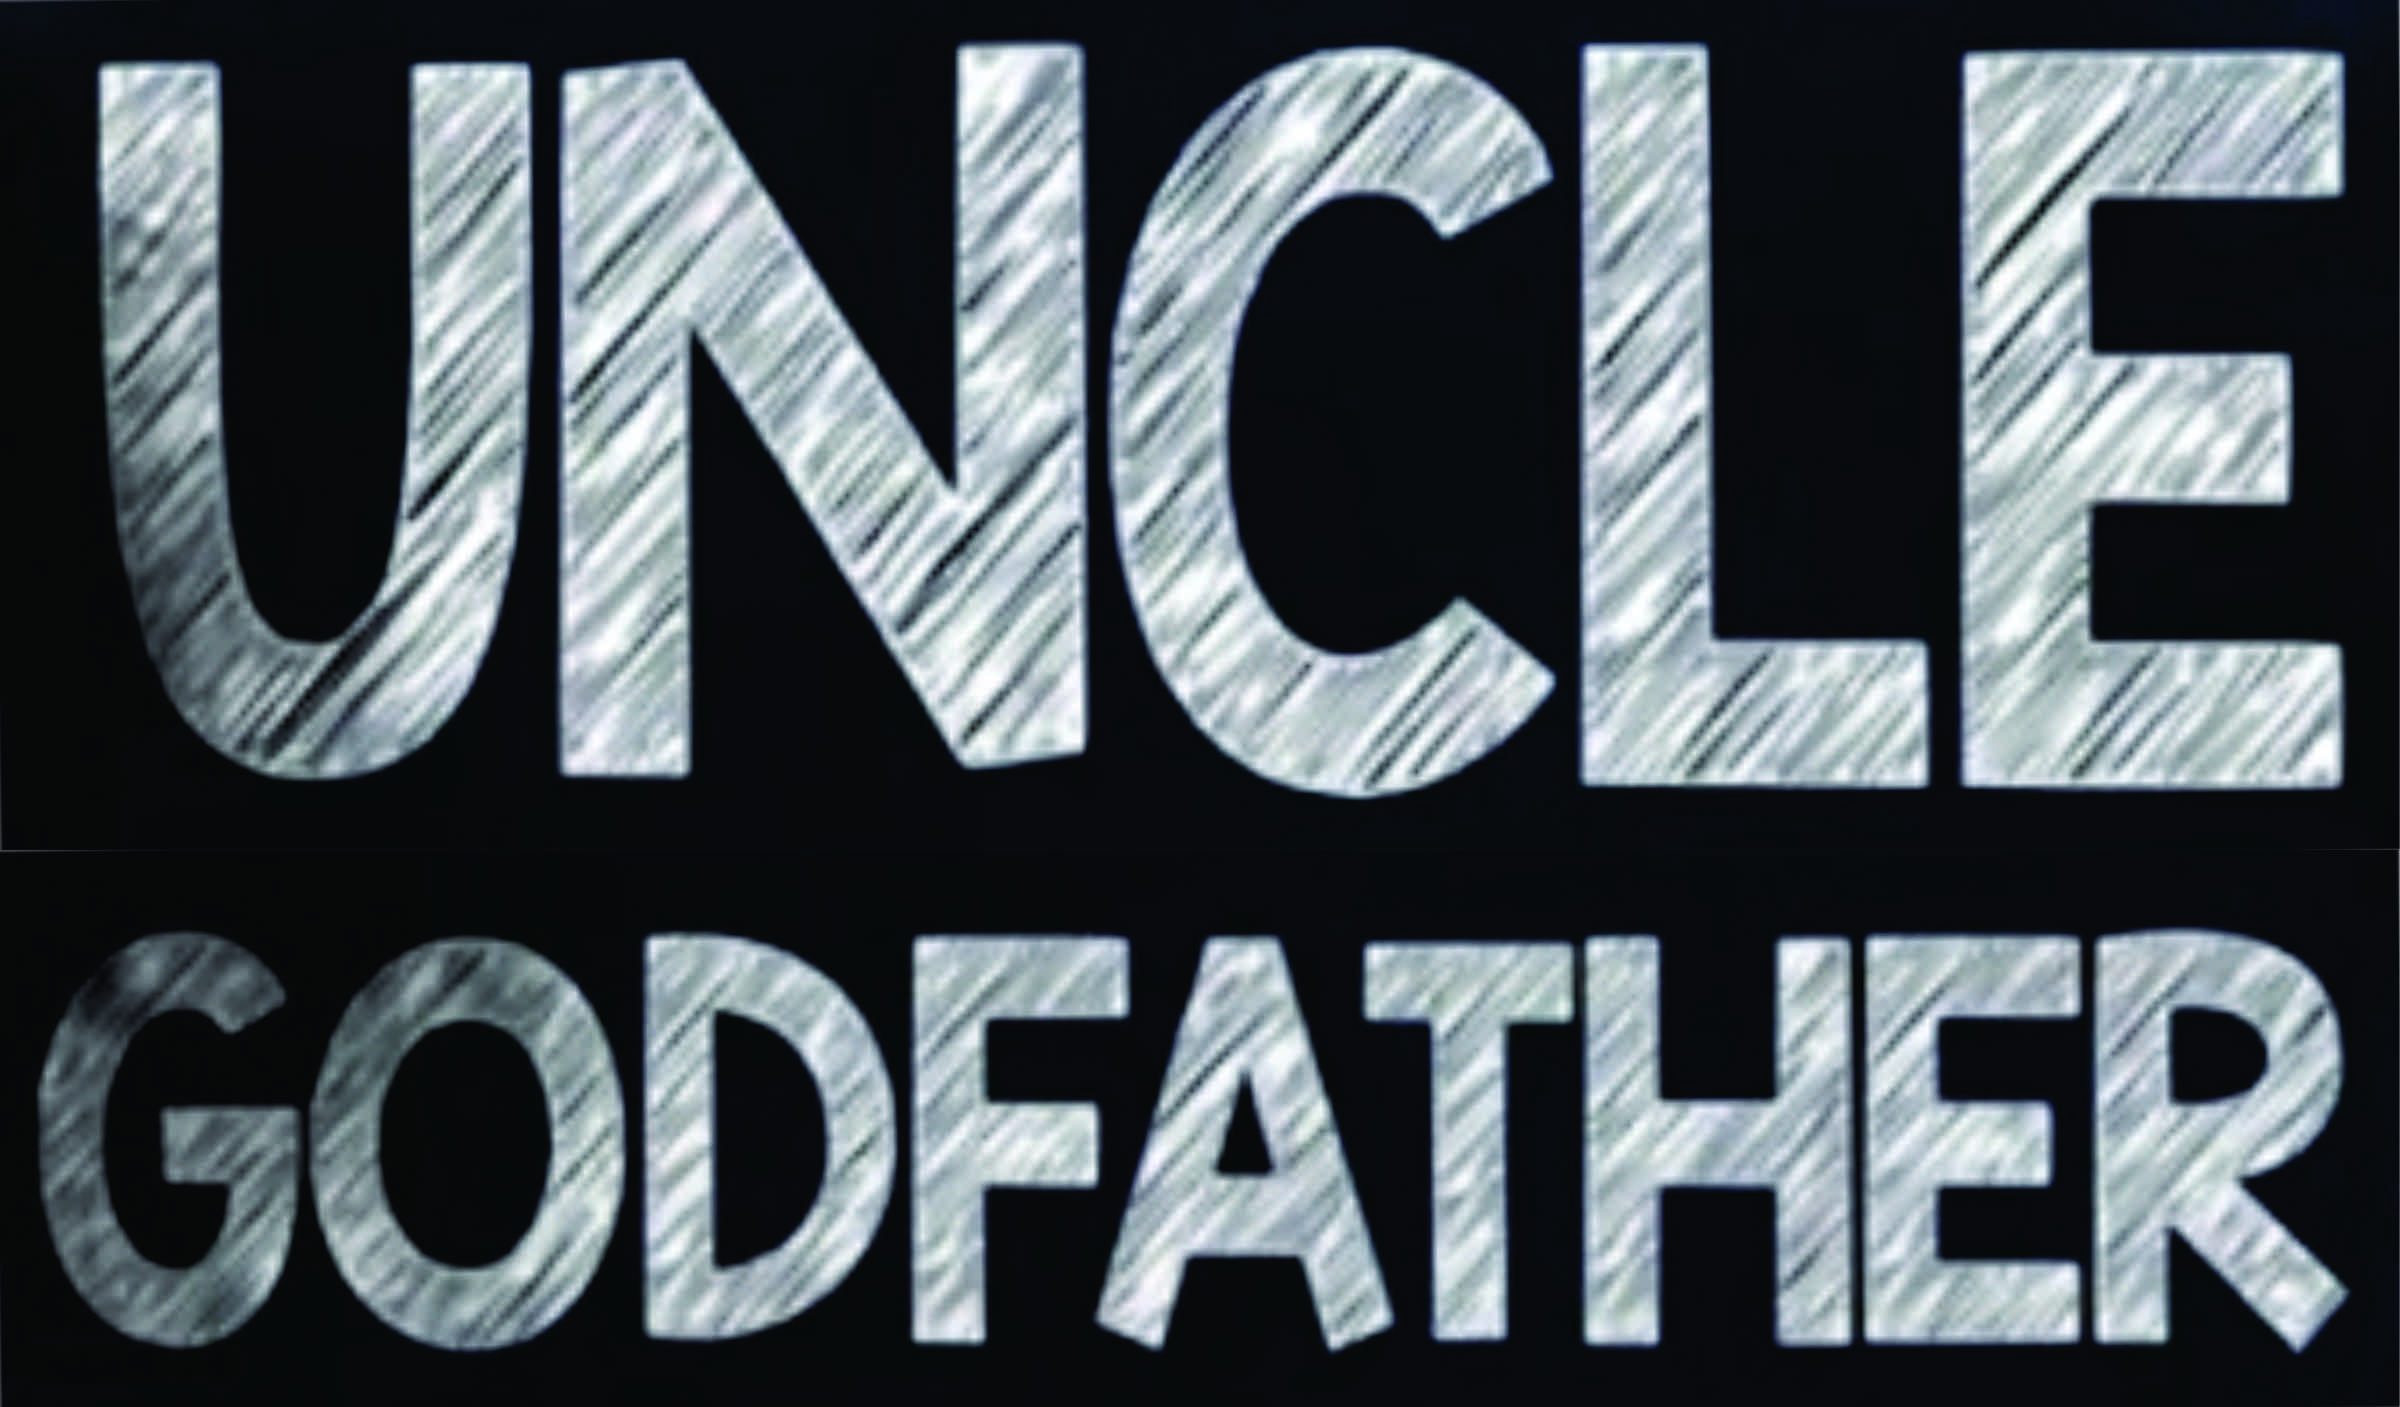 UNCLE_GODFATHER.jpg